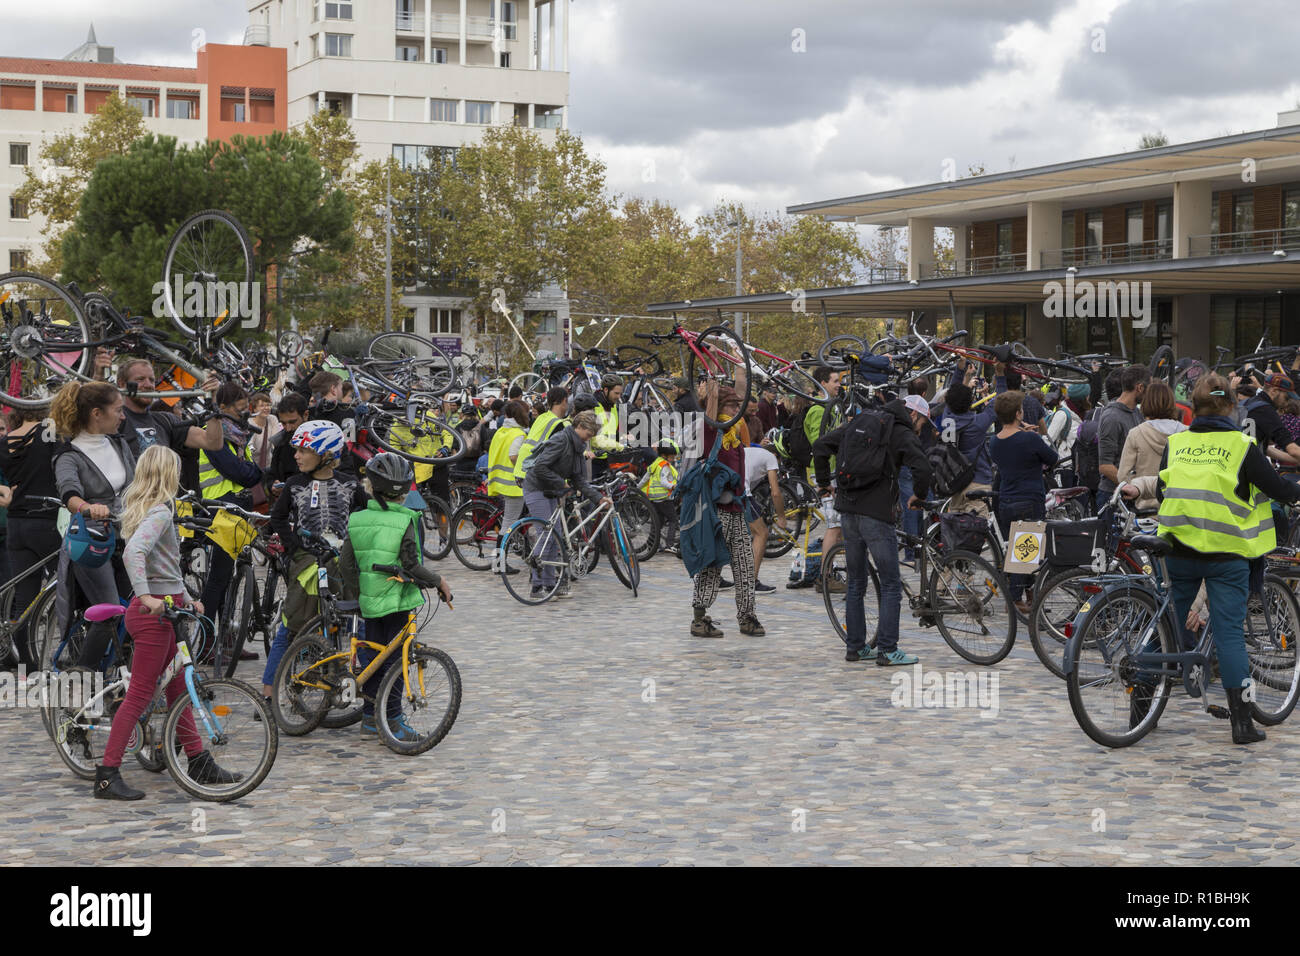 Montpellier, Occitanie, France 10th Nov, 2018. Citizen call to demonstrate by bike in the streets of Montpellier to protest against the lack of infrastructure dedicated to cyclists. Following the statements of the Mayor of Montpellier Philippe Saurel who said in an interview with France 3 that we do not make a bike path for two people. More than 1200 people were present at this event. Credit: Digitalman/Alamy Live News Stock Photo